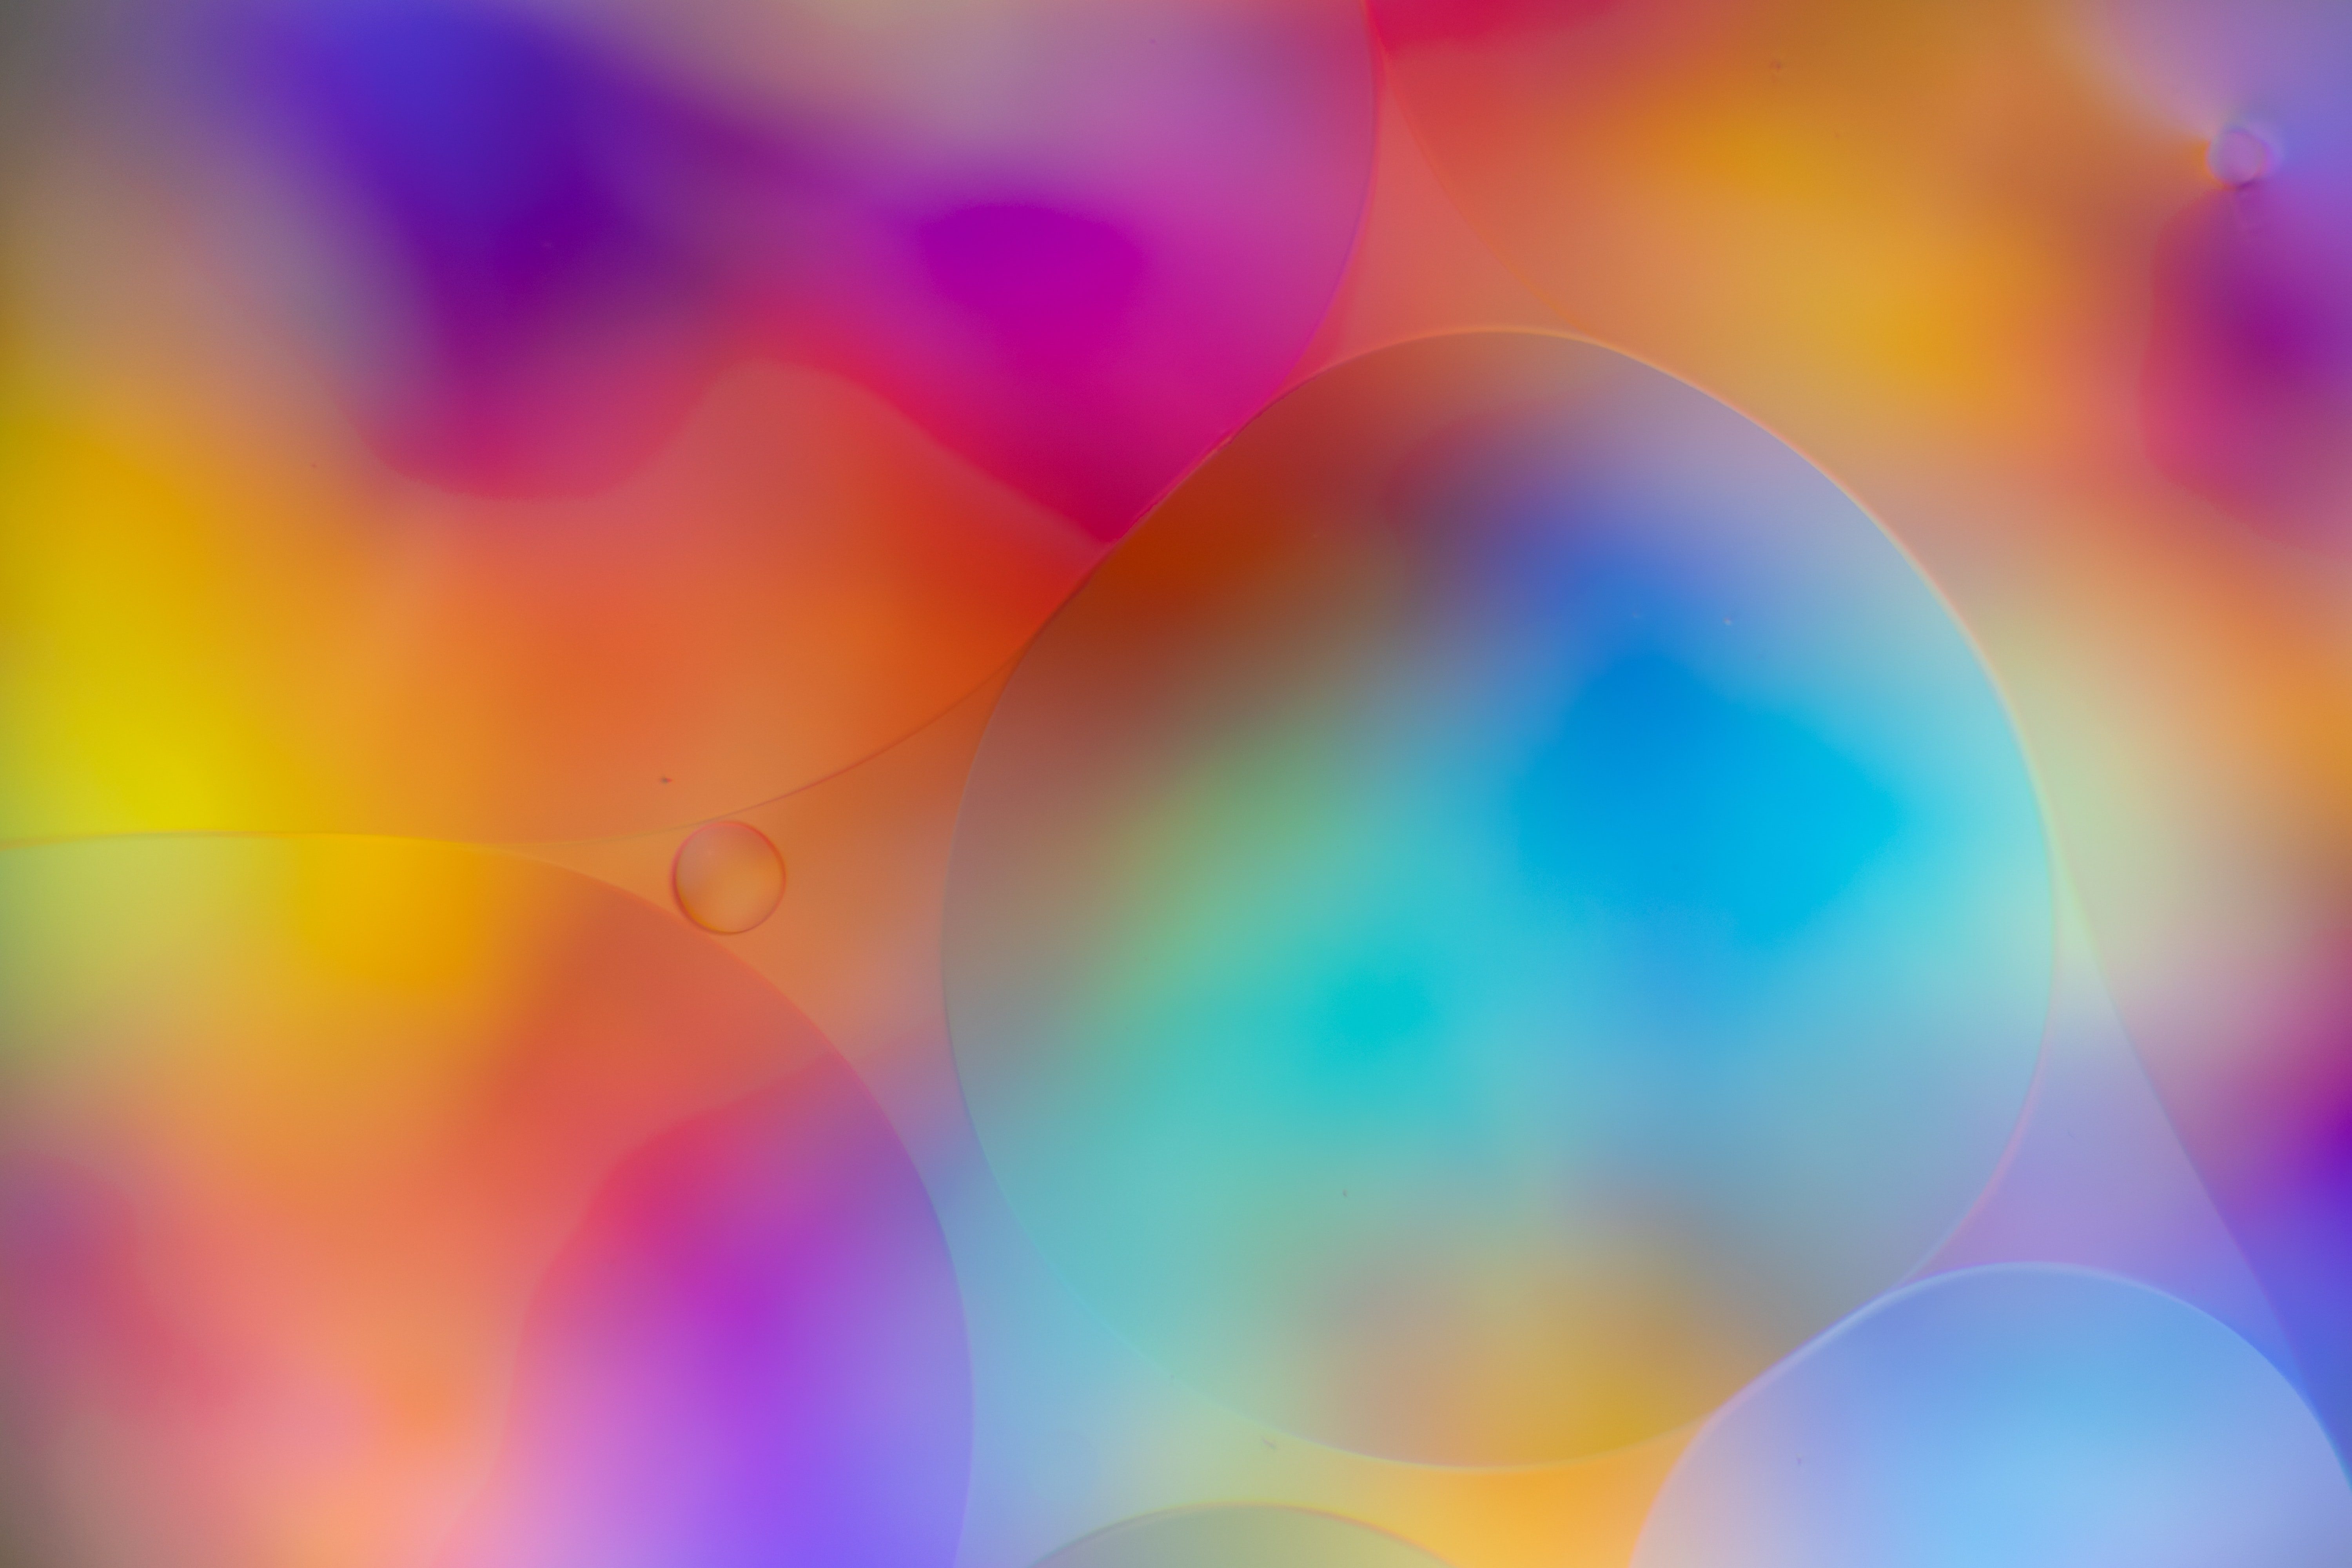 motley, abstract, water, bubbles, multicolored, gradient